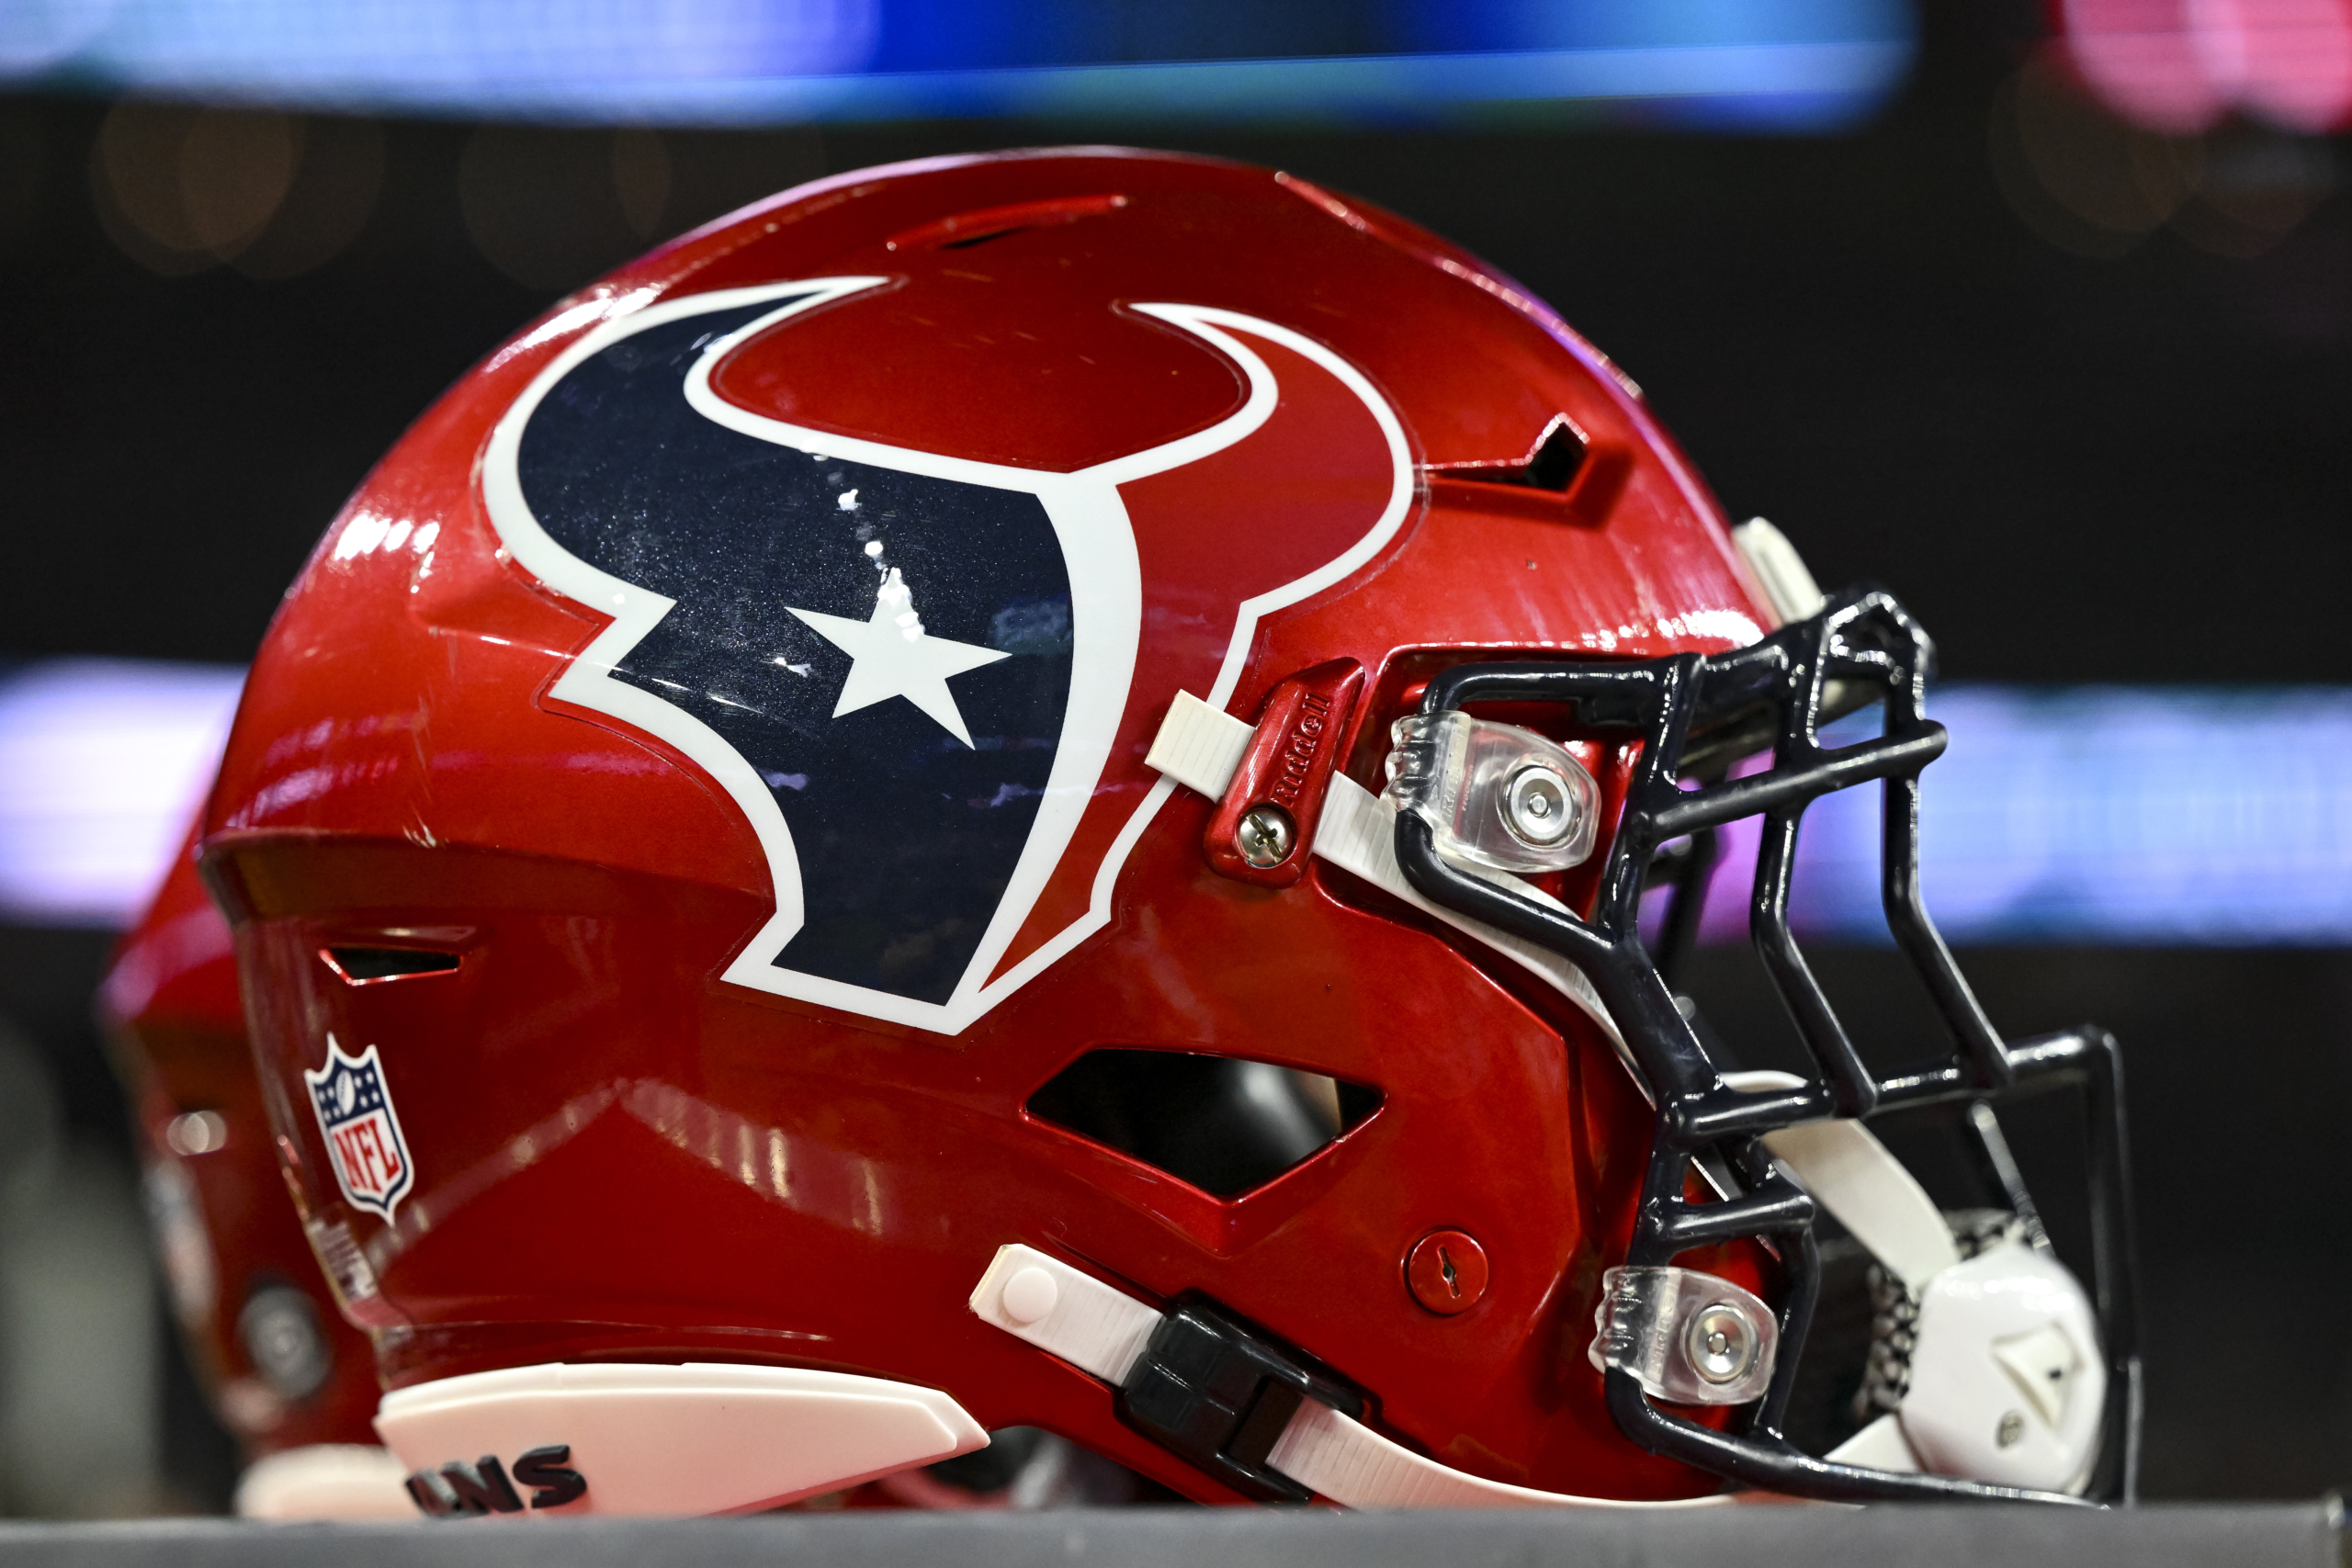 How to stream Texans games online